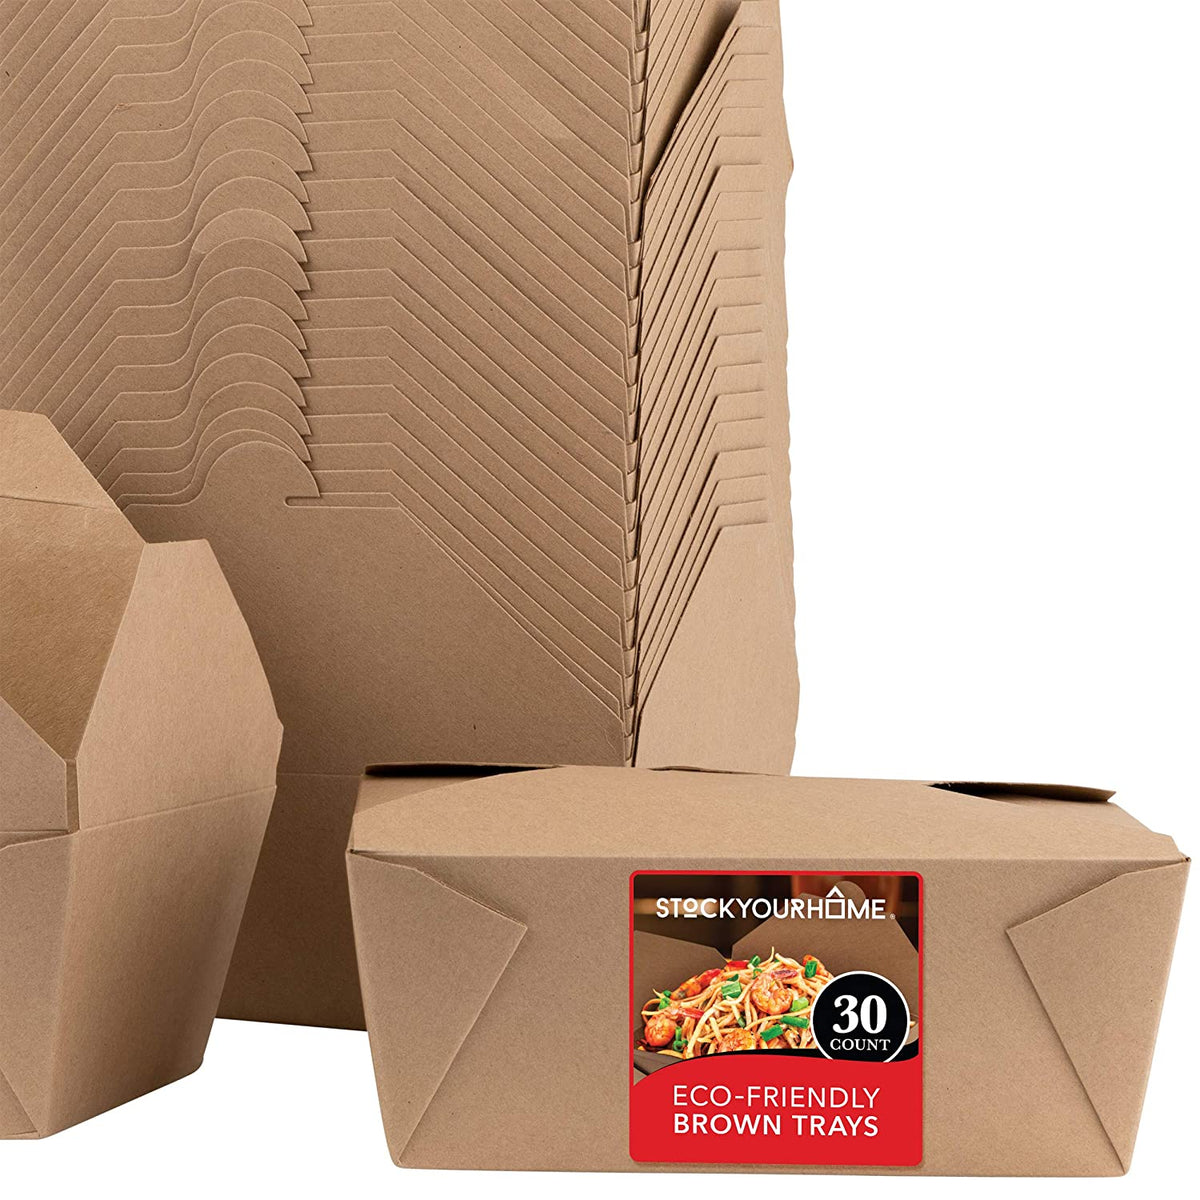 Brown-Bag Challenge: Hot Food Containers